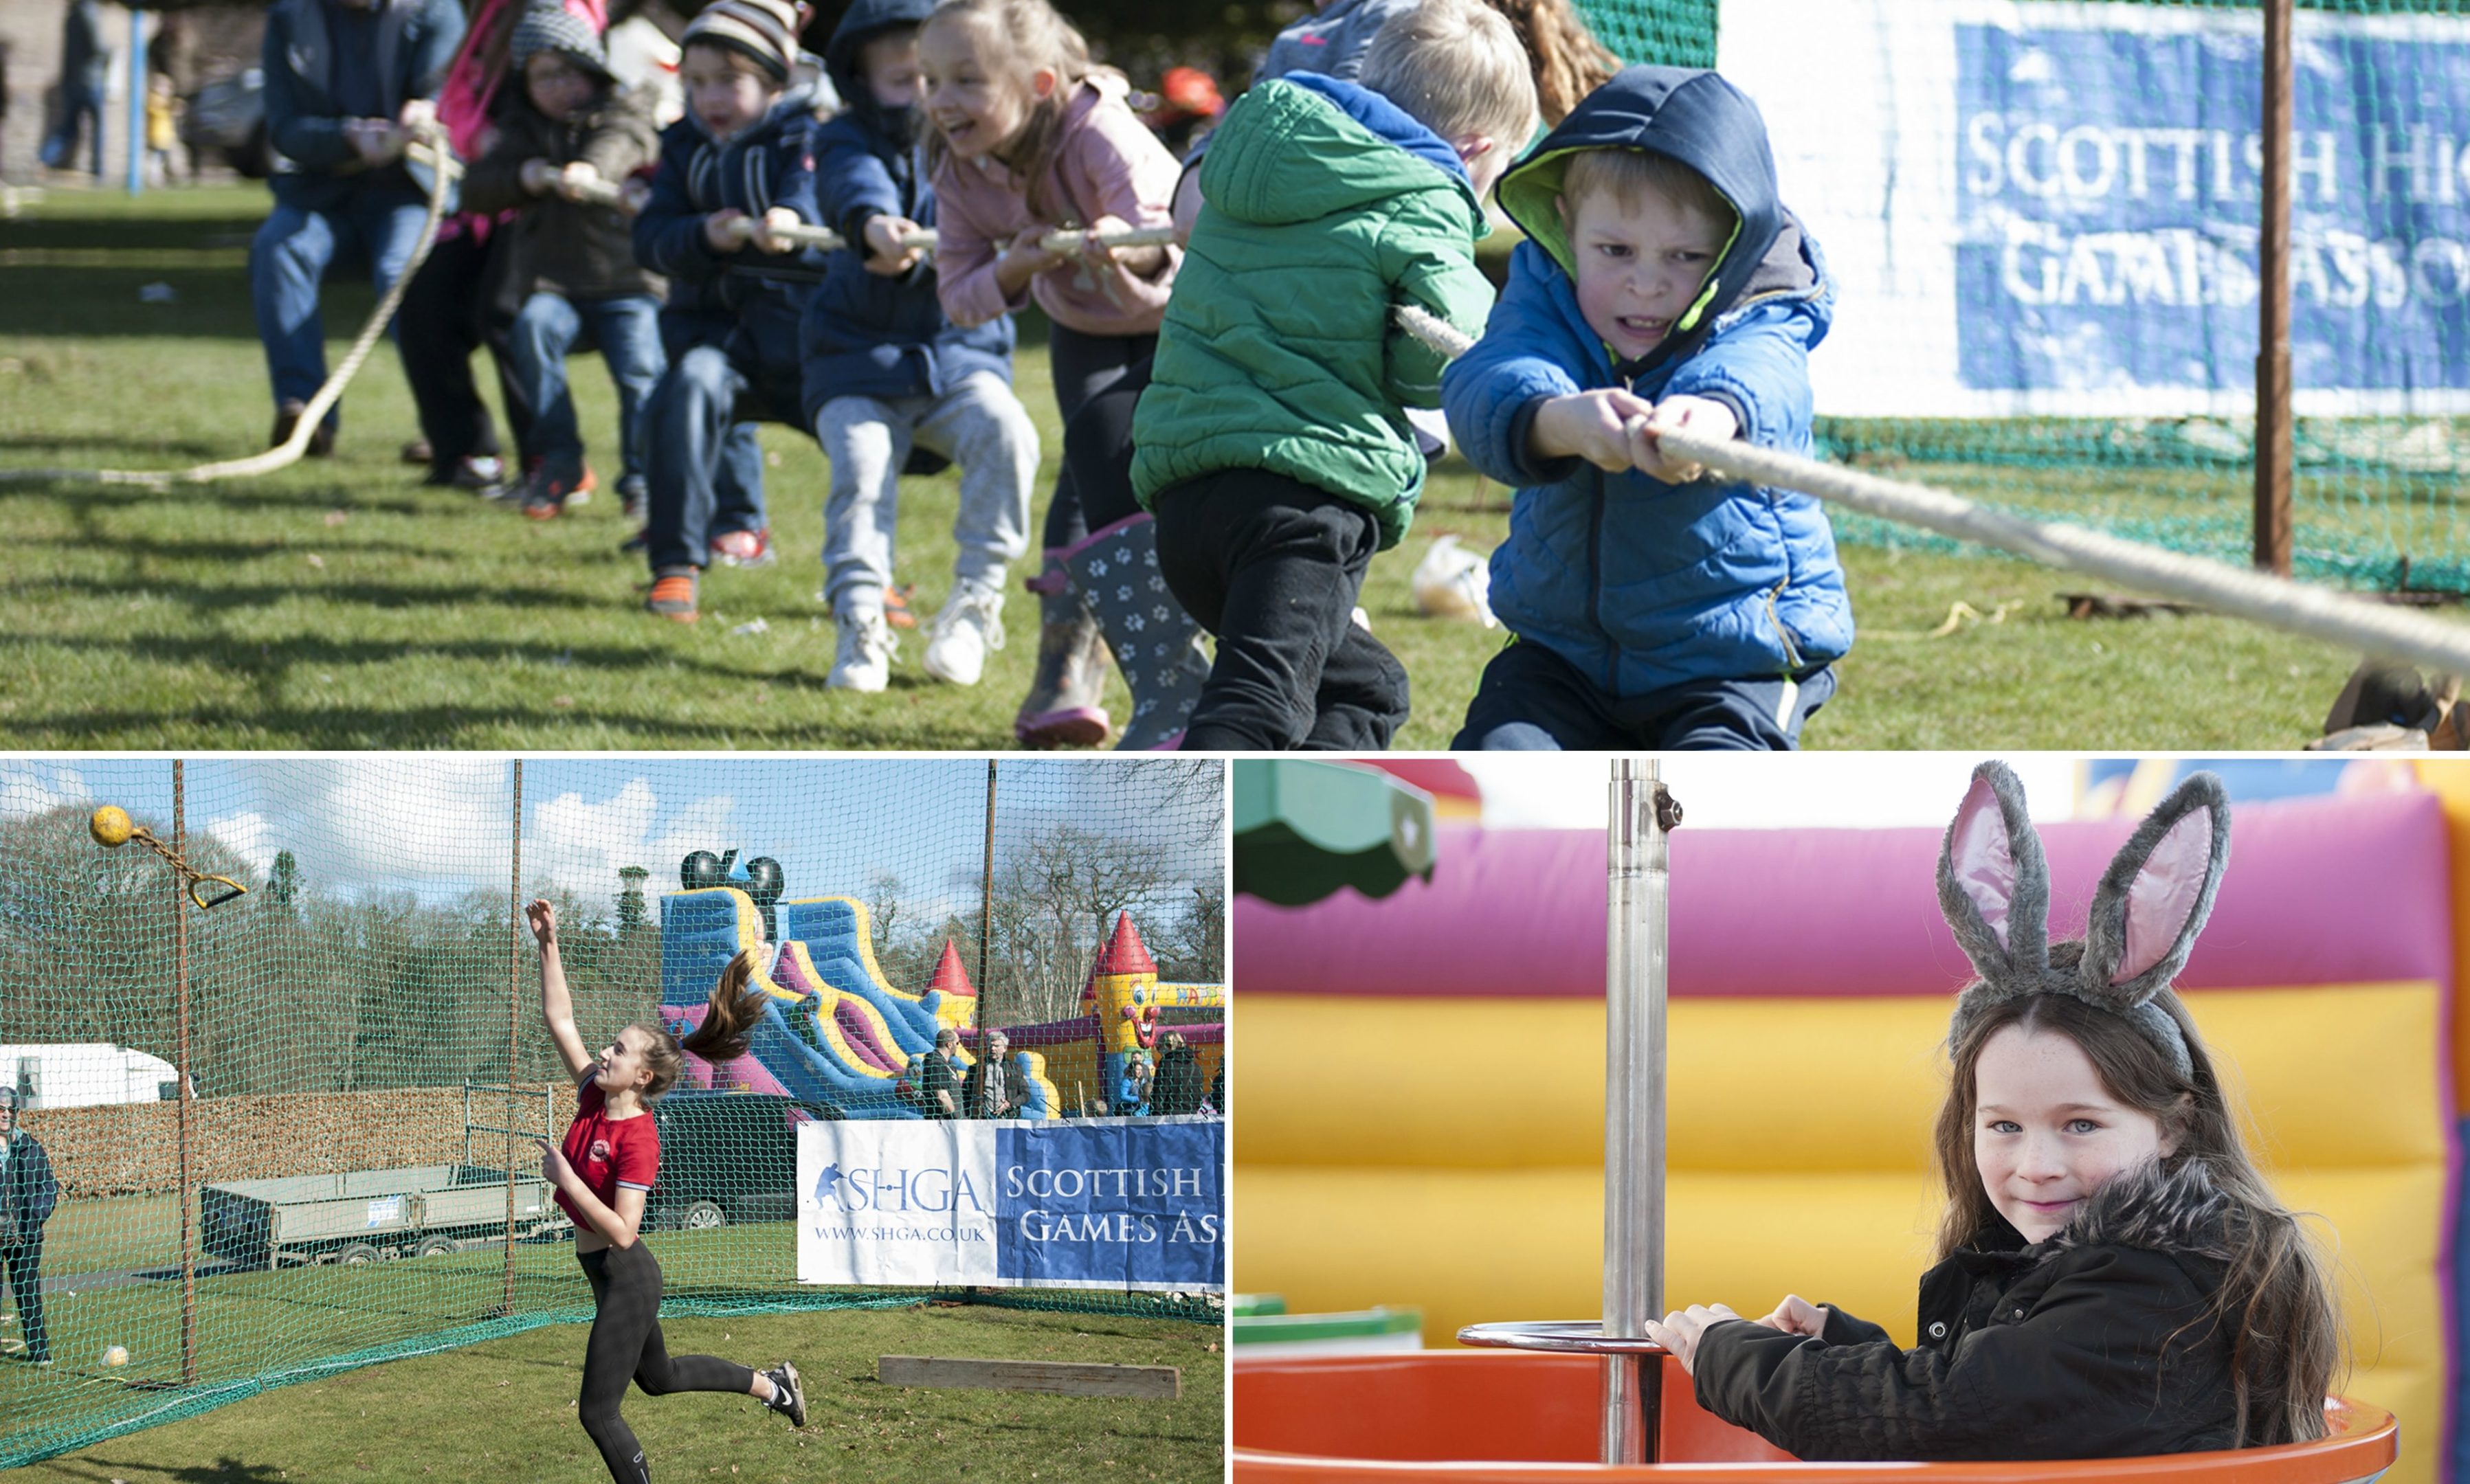 Kids took part in Highland Games events during Easter Sunday at Glamis Castle